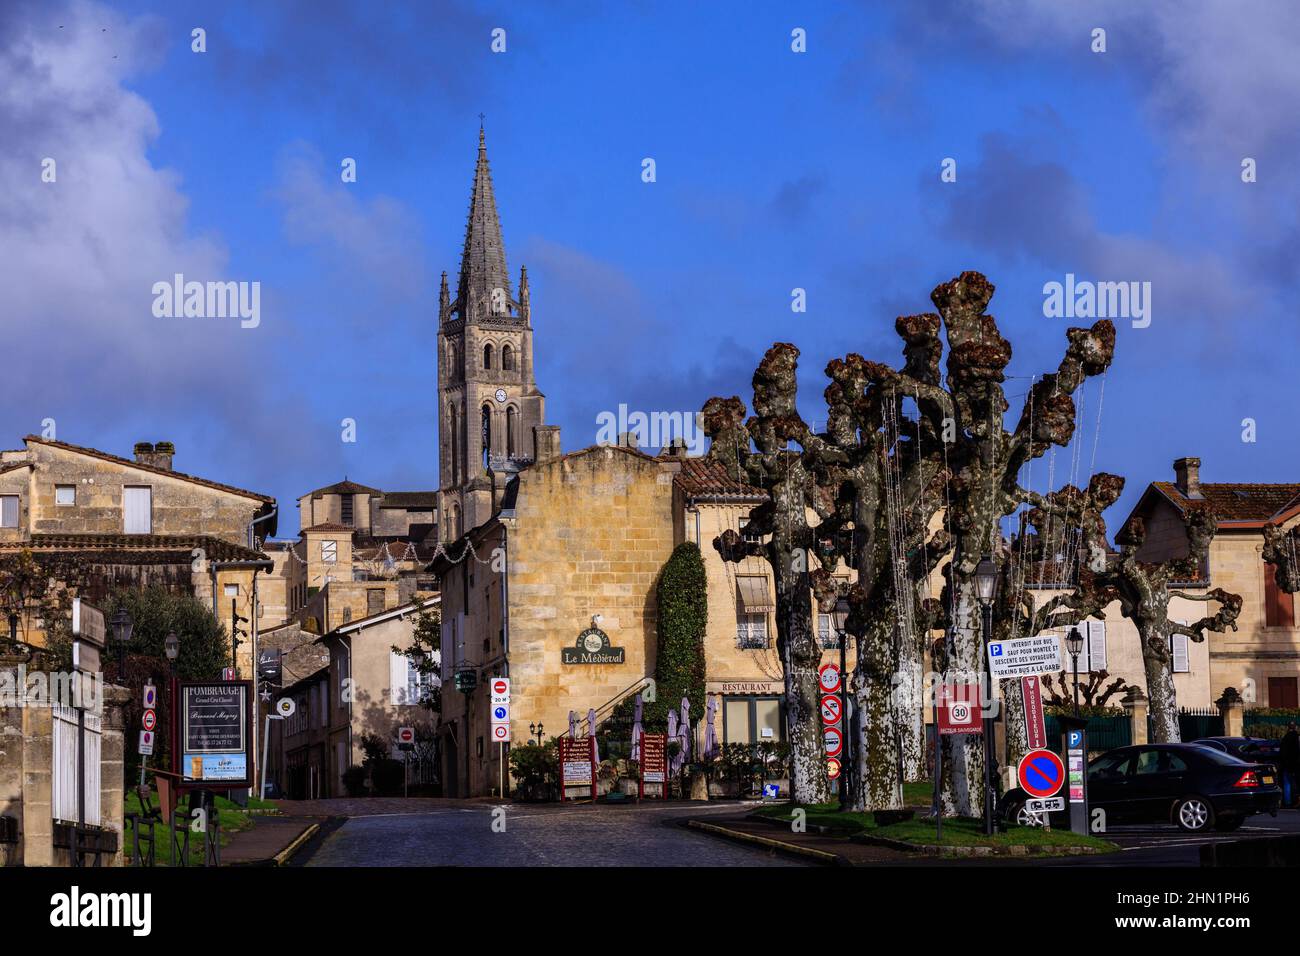 Saint Emilion is a medieval city in southwestern France, surrounded by vineyards. The monolithic church was declared by UNESCO a world Heritage site. Stock Photo